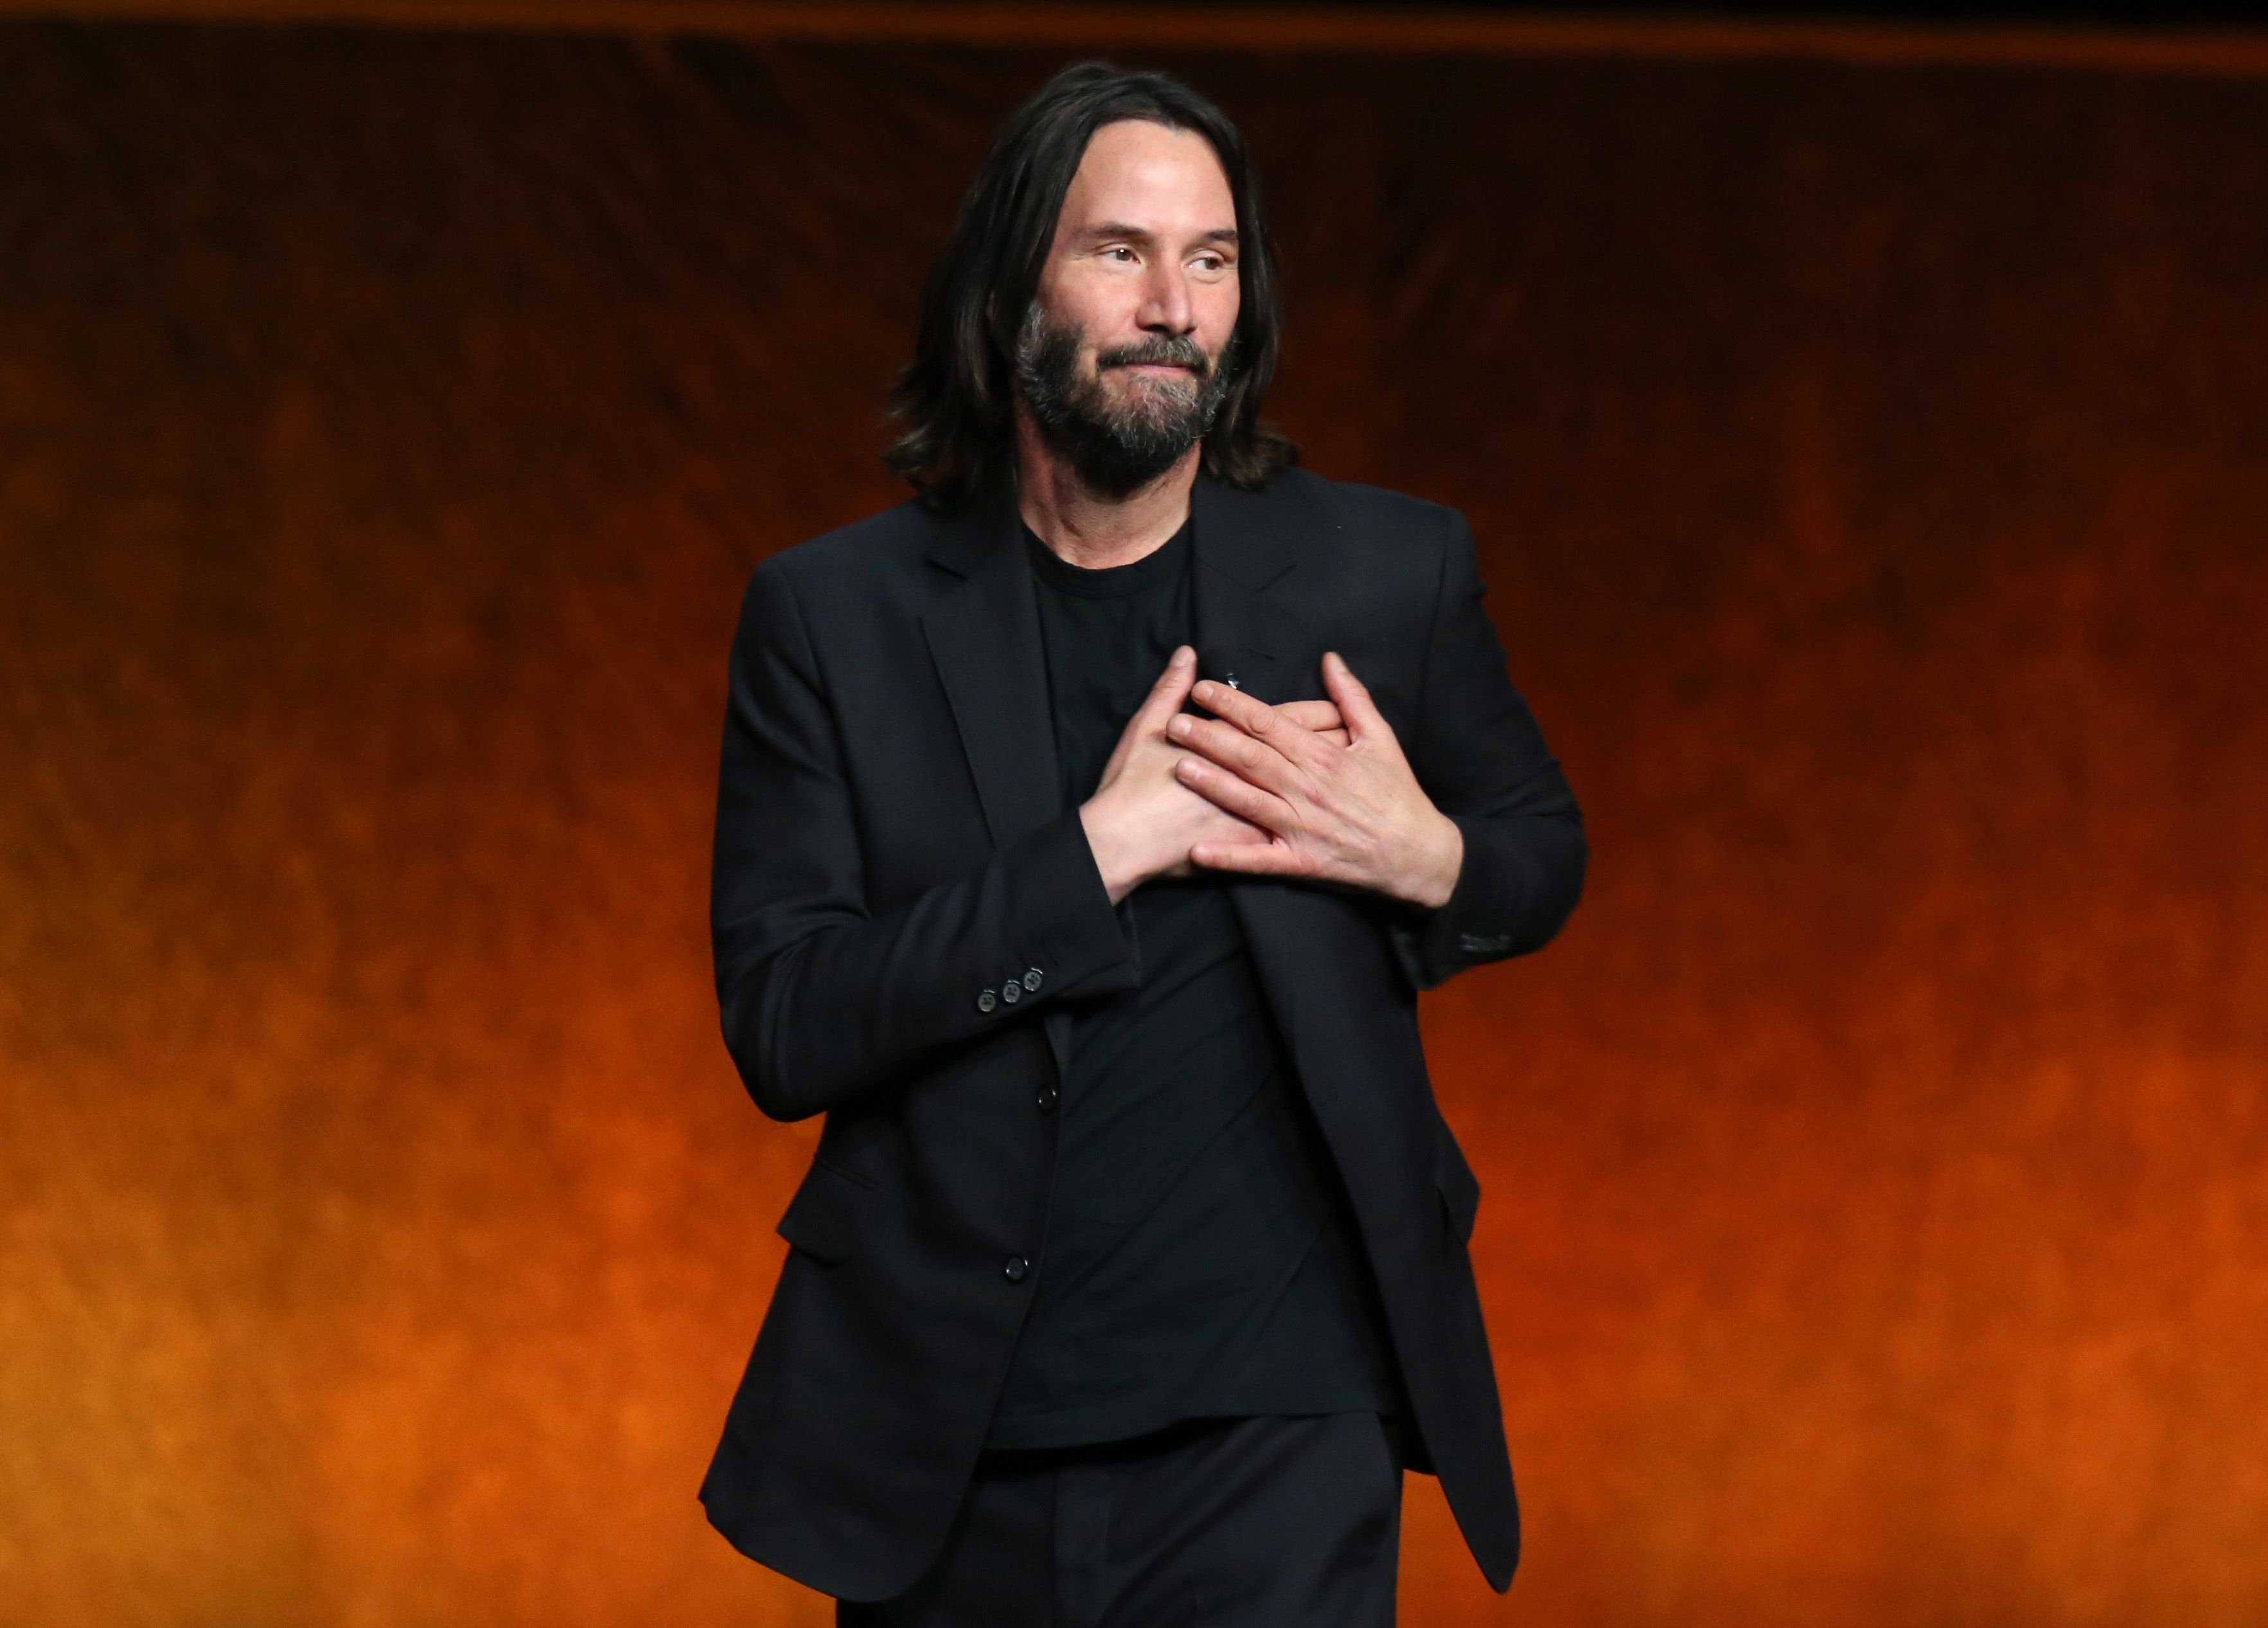 Keanu Reeves during the Lionsgate Exclusive Presentation at Caesars Palace during CinemaCon 2022 on April 28, 2022 in Las Vegas, Nevada.  |  Source: Getty Images